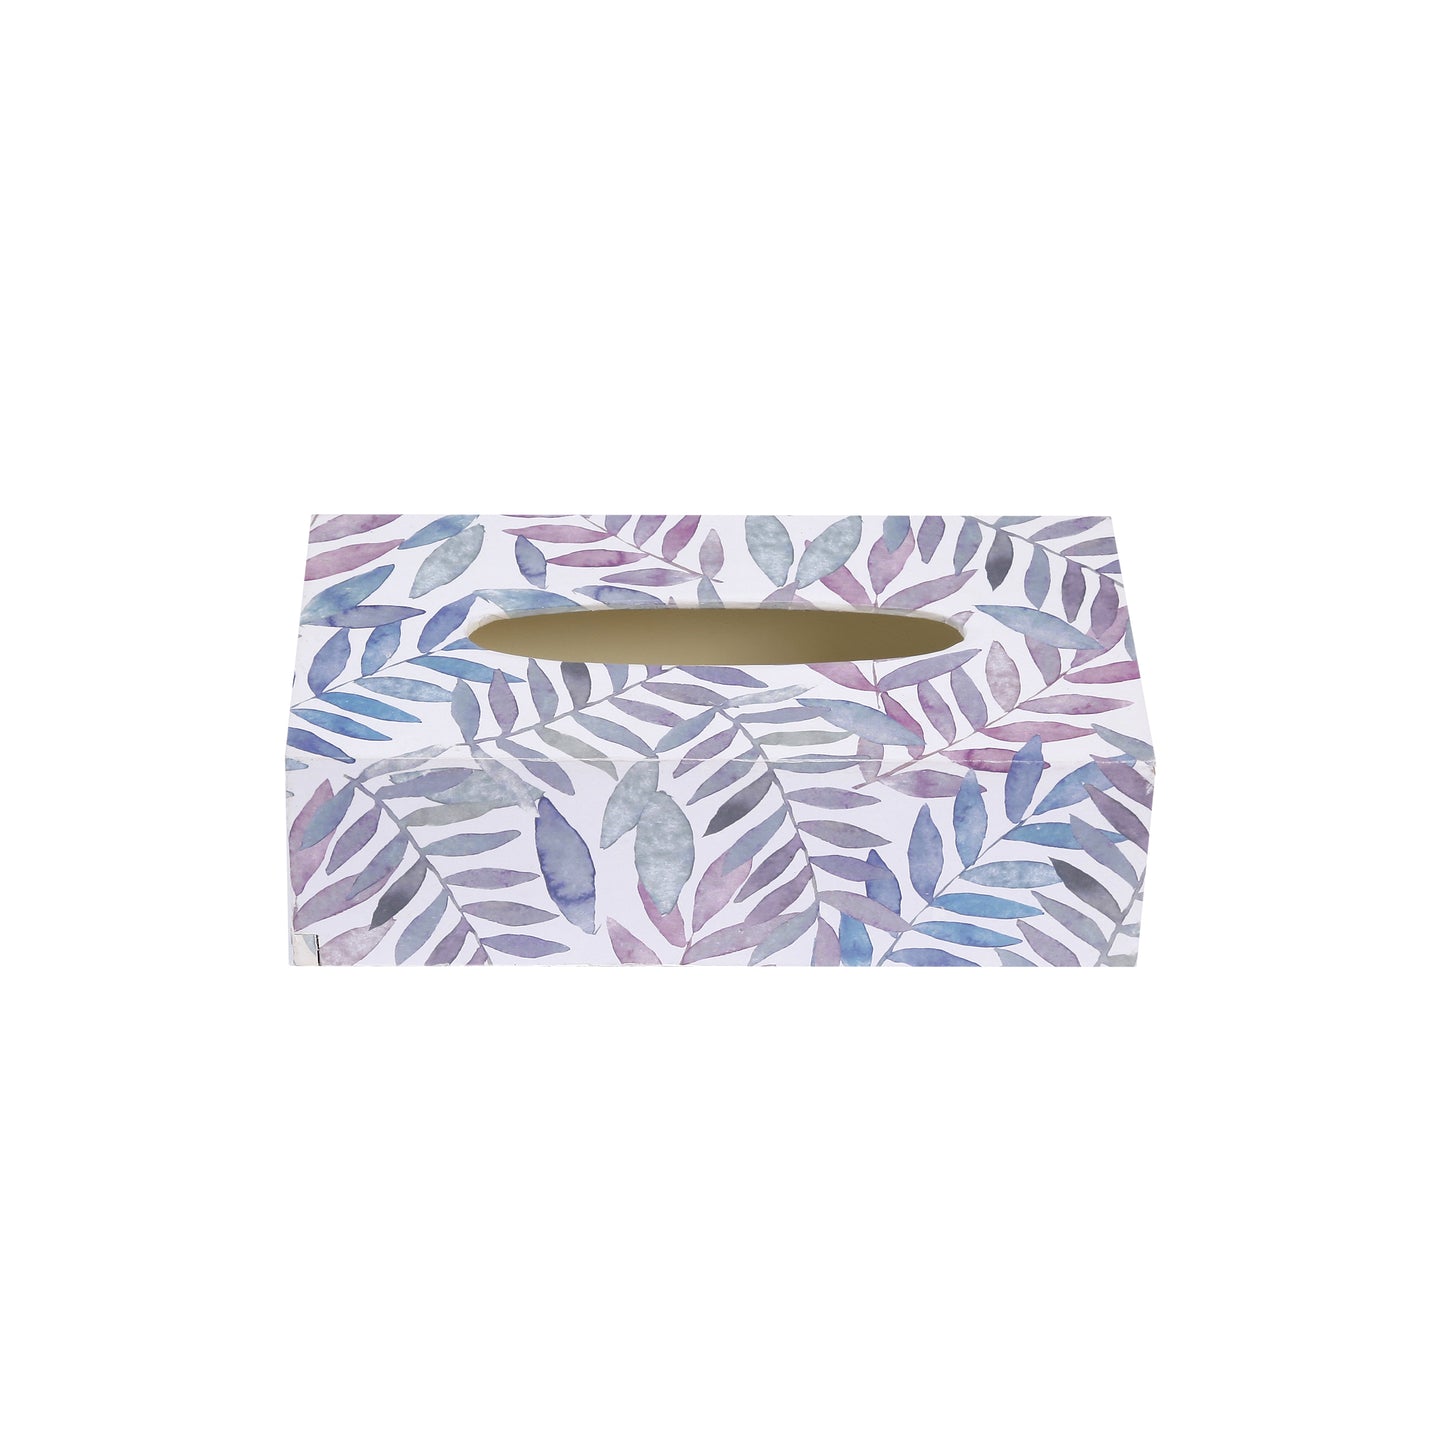 A Tiny Mistake Pastel Leaves Rectangle Tissue Box, 26 x 13 x 8 cm